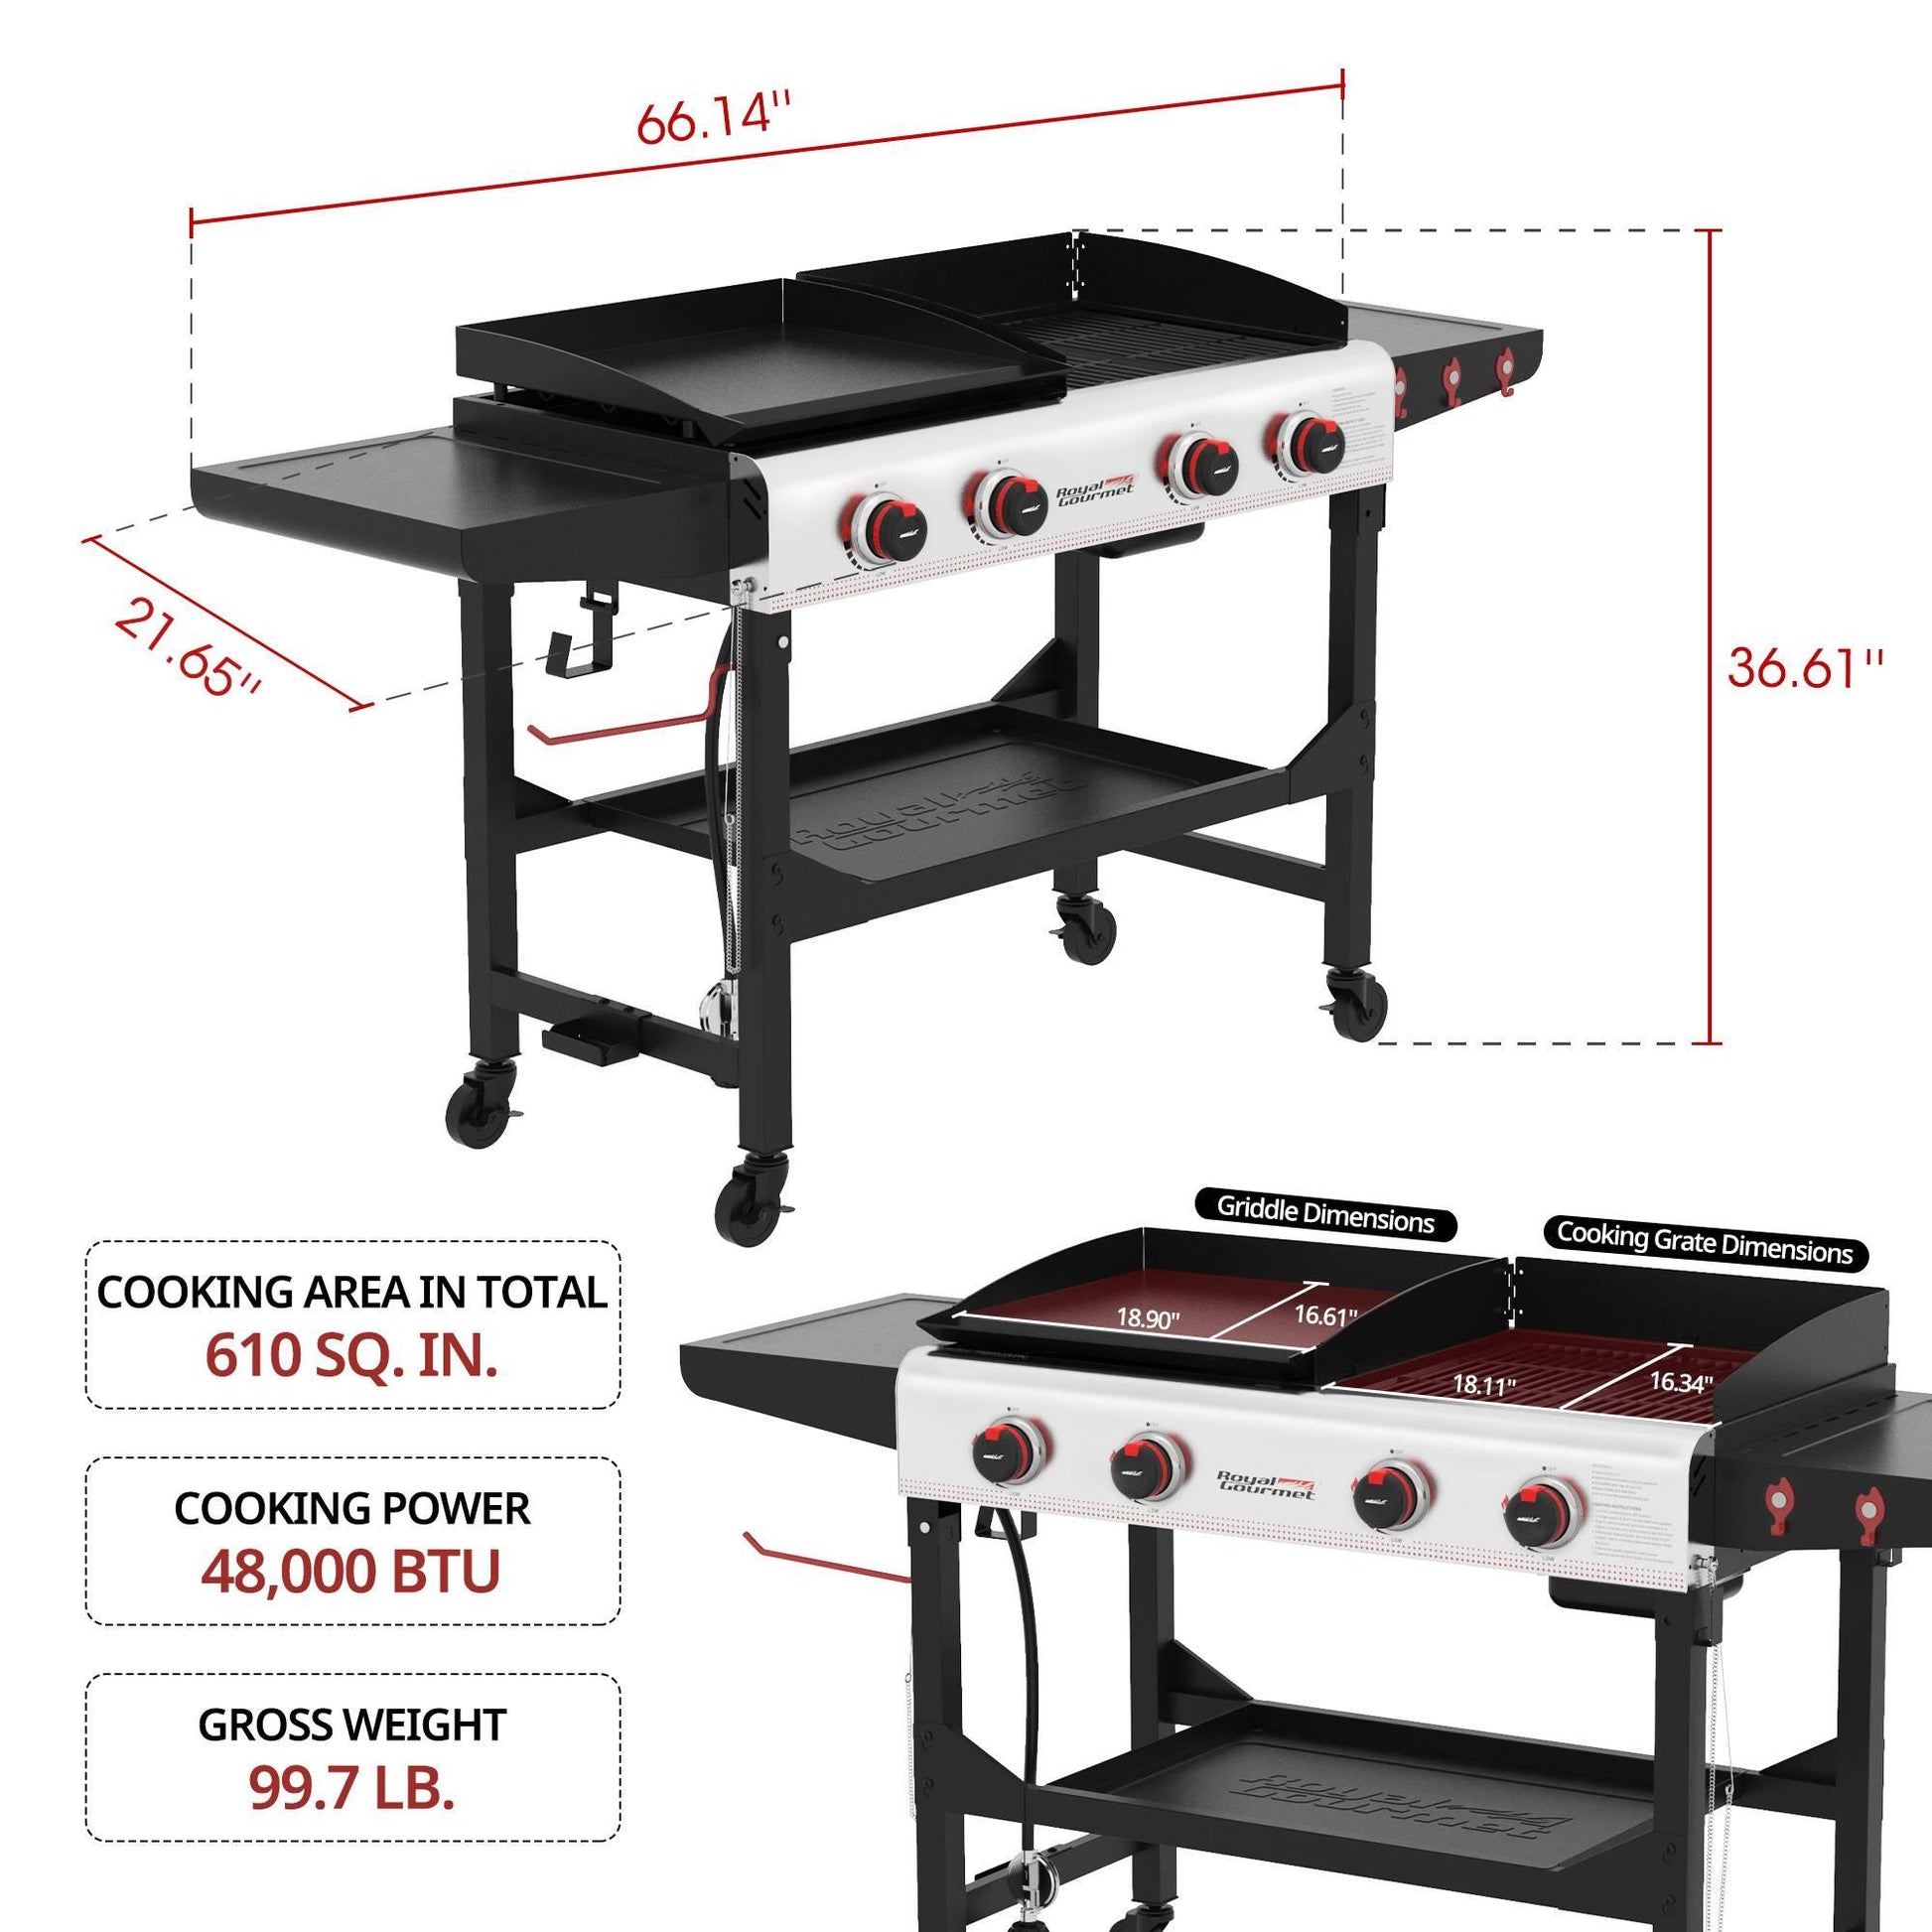 3-Burner Gas Grill and Griddle Combo Small Flat Top Grill Outdoor Propane  BBQ